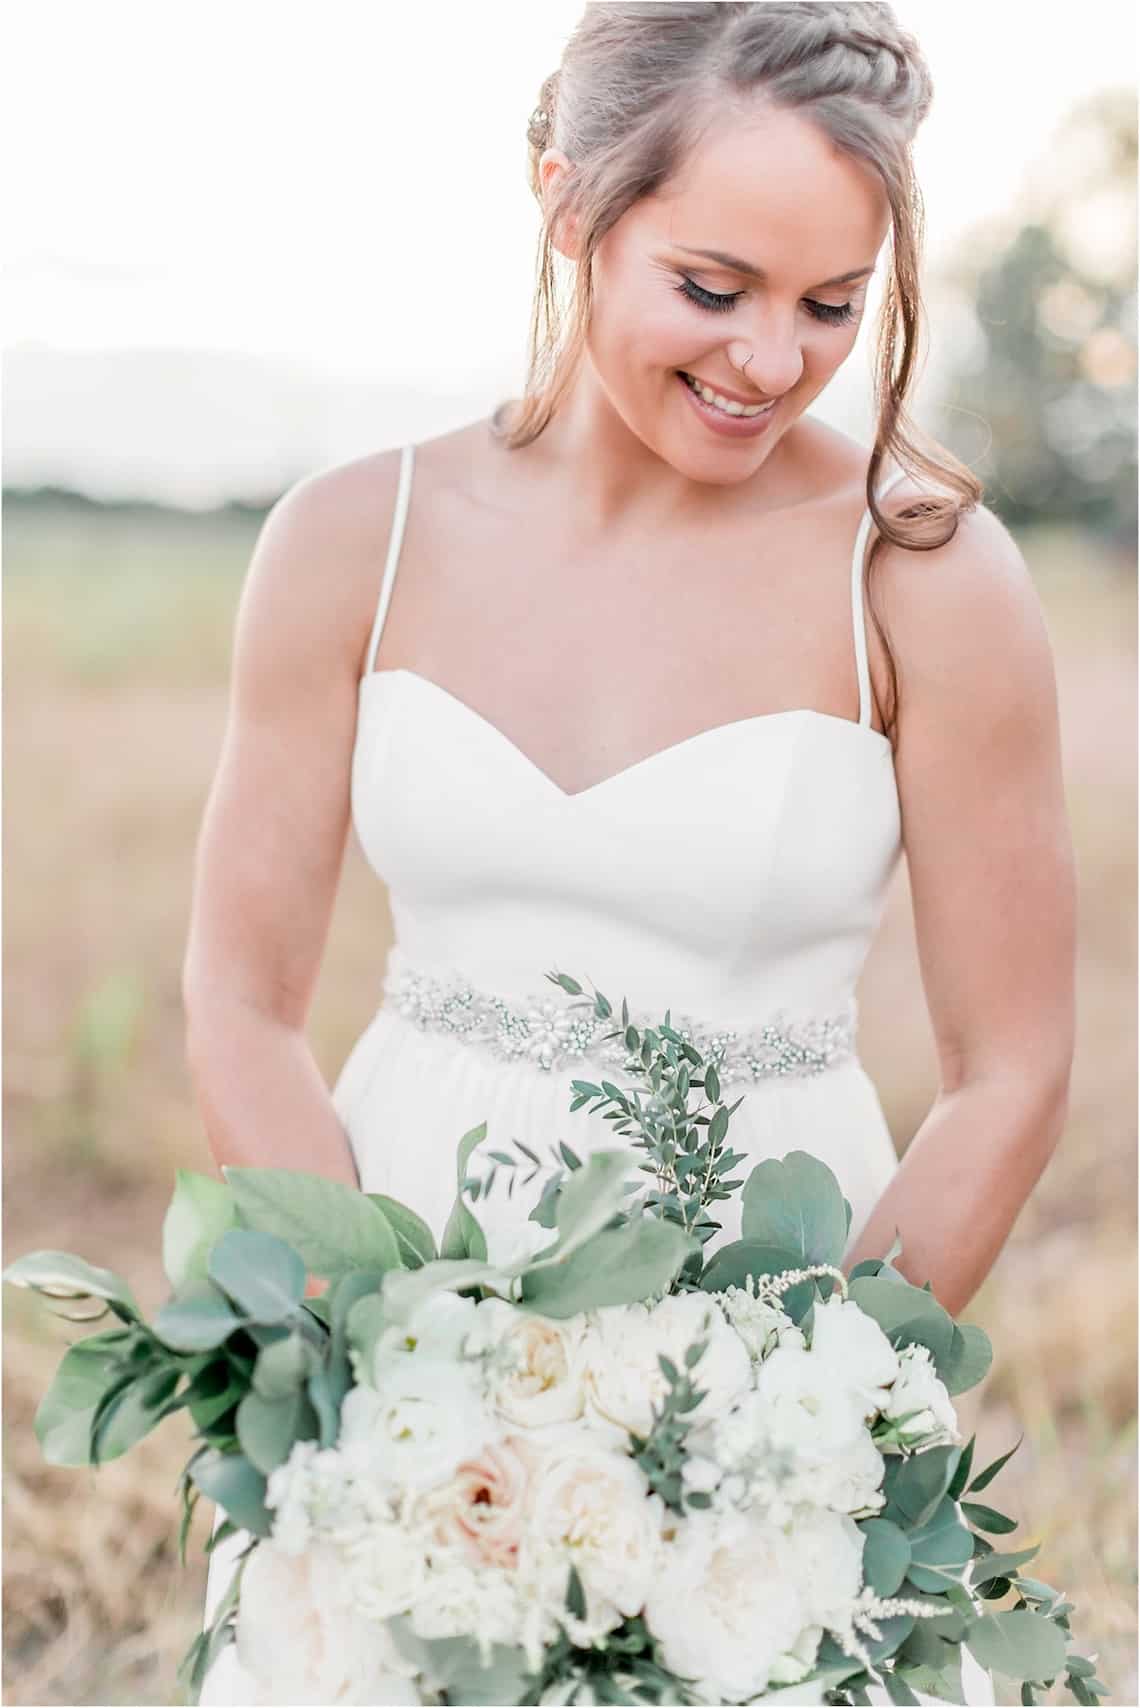 Smiling Bride with White Dress and White and Greenery Bouquet